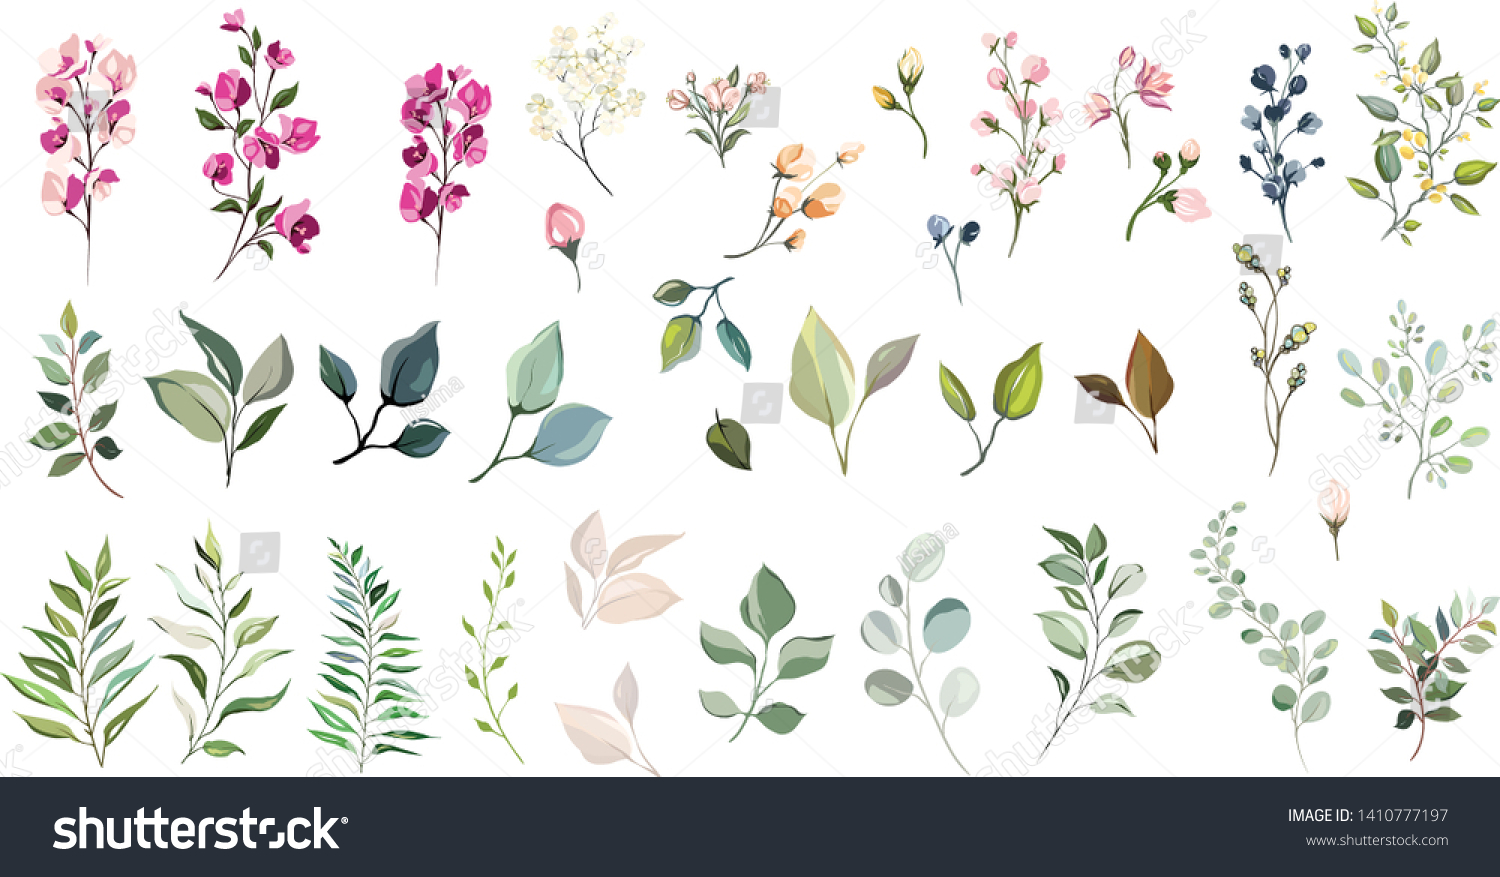 Set of floral elements. Flower and green leaves. Wedding concept - flowers. Floral poster, invite. Vector arrangements for greeting card or invitation design #1410777197